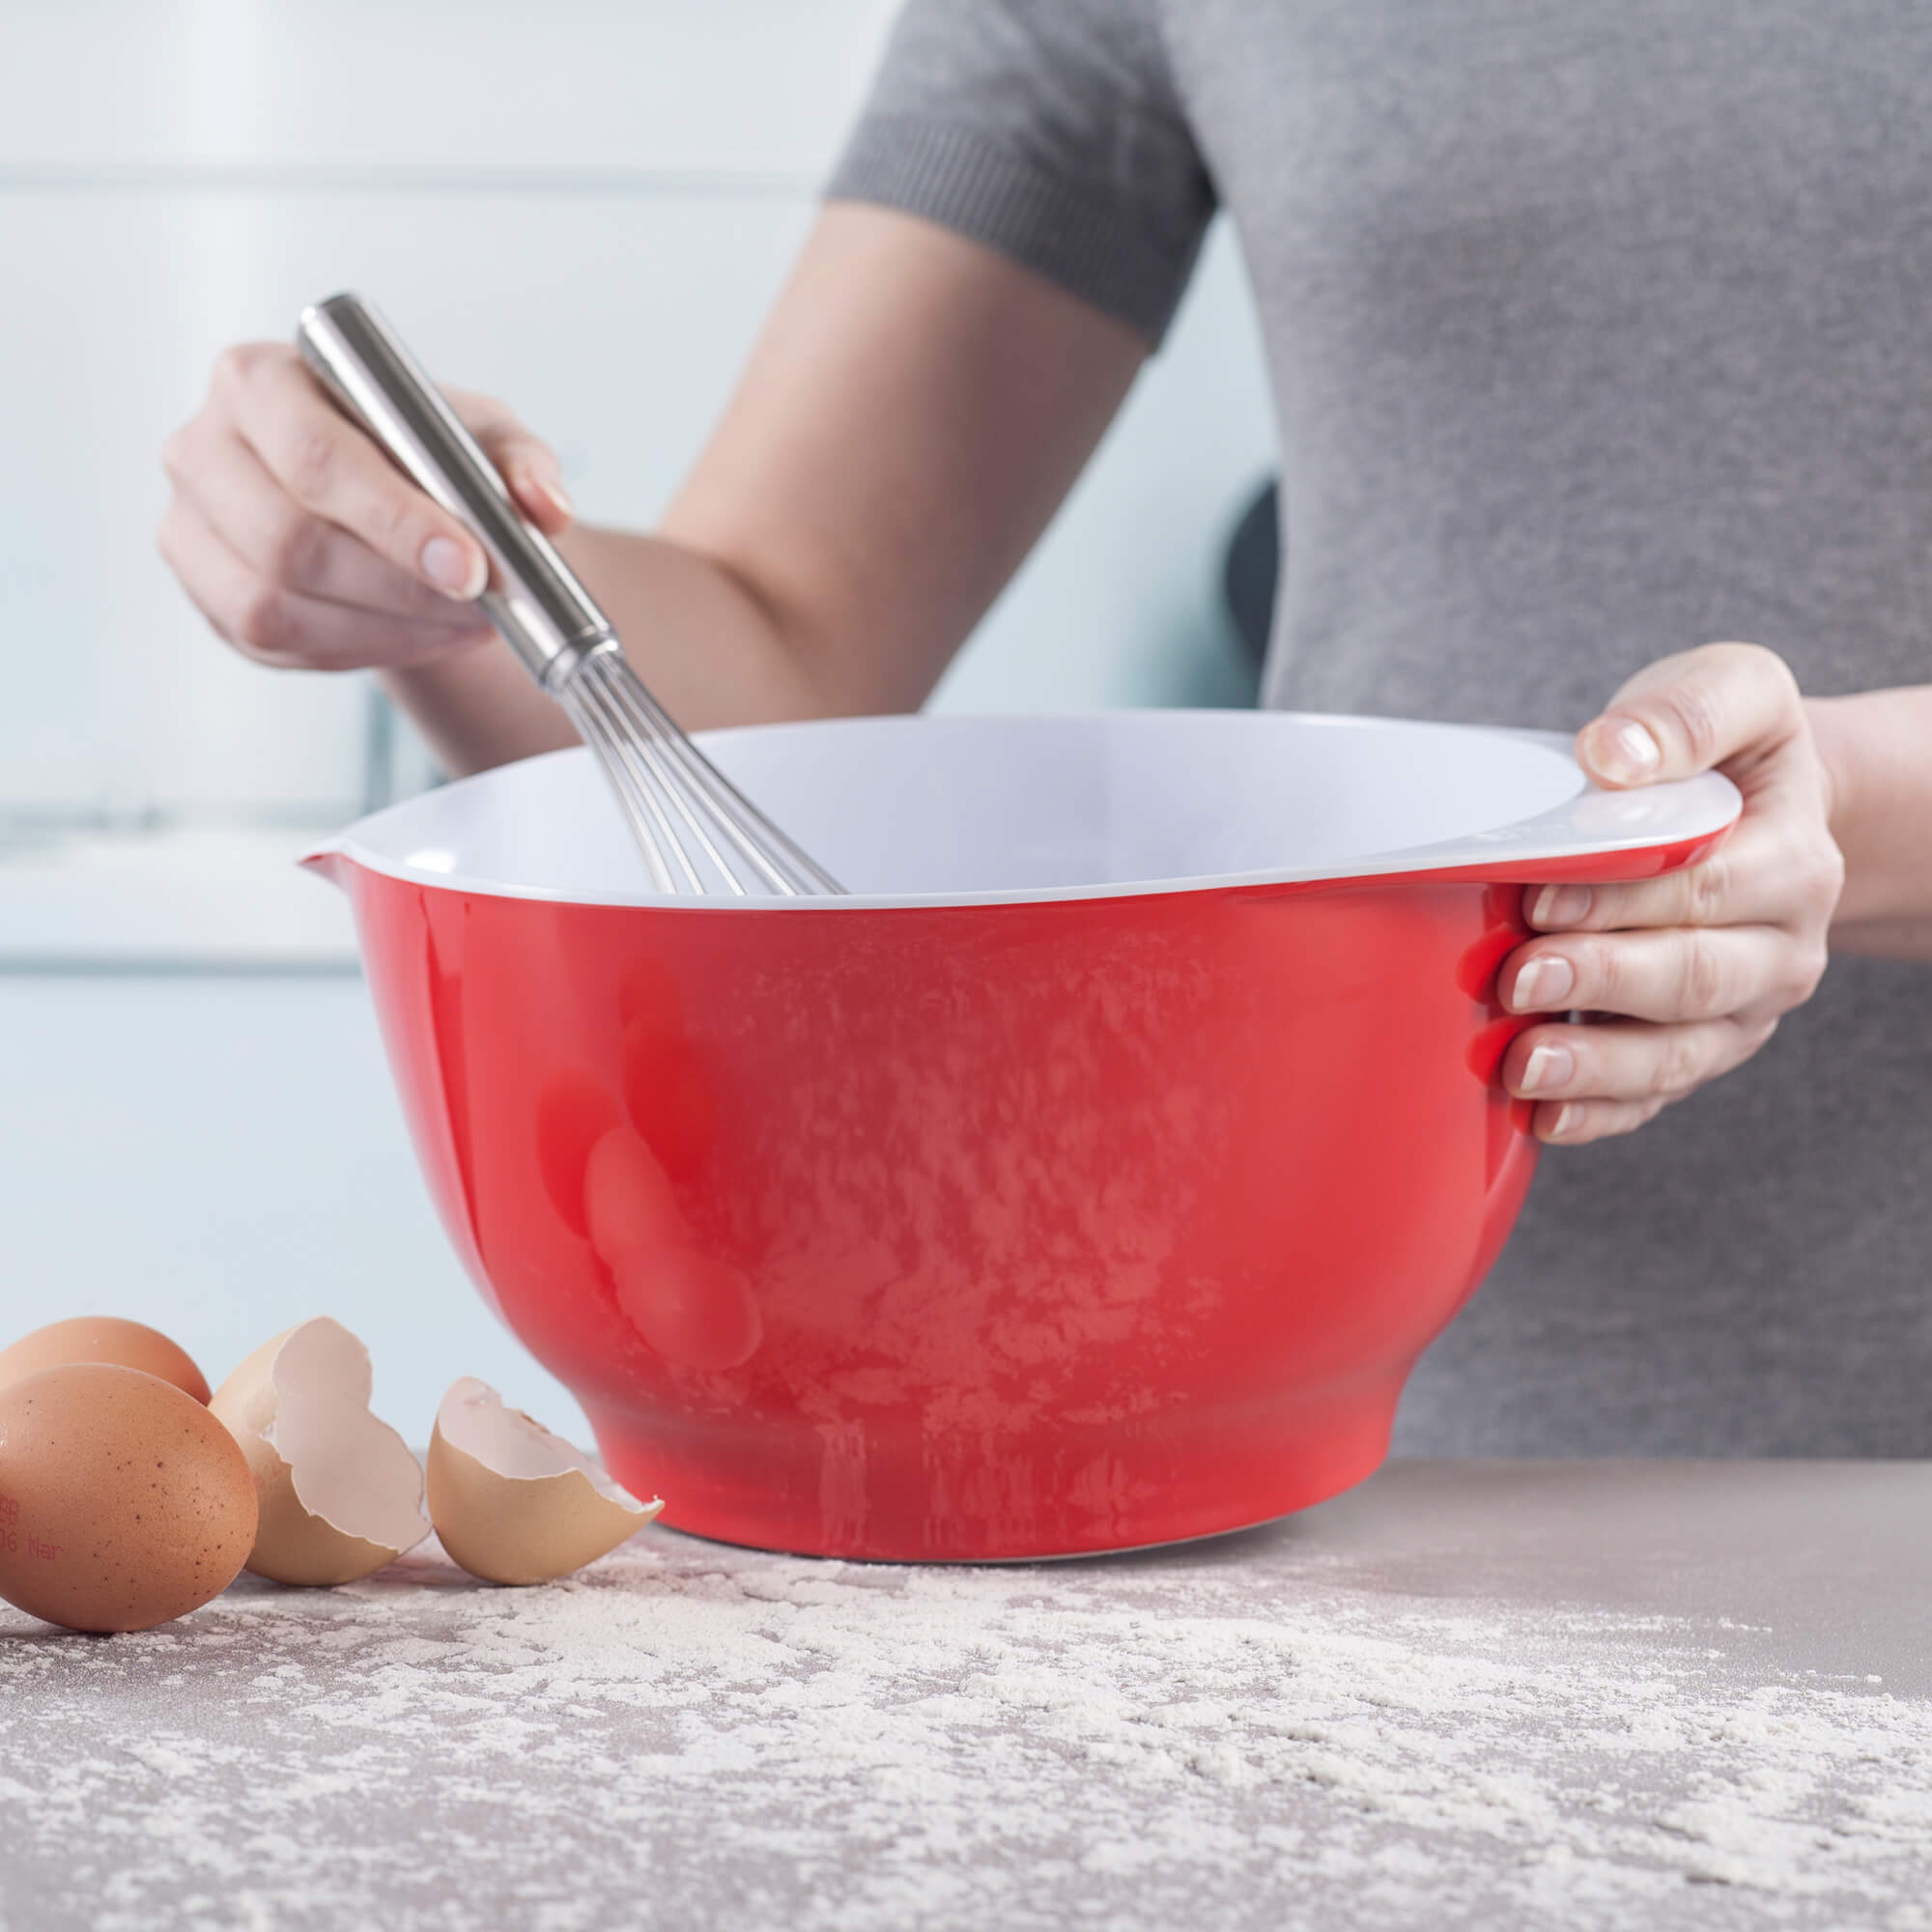 Baking using the Large Zeal Duo Tone Mixing Bowl in Red